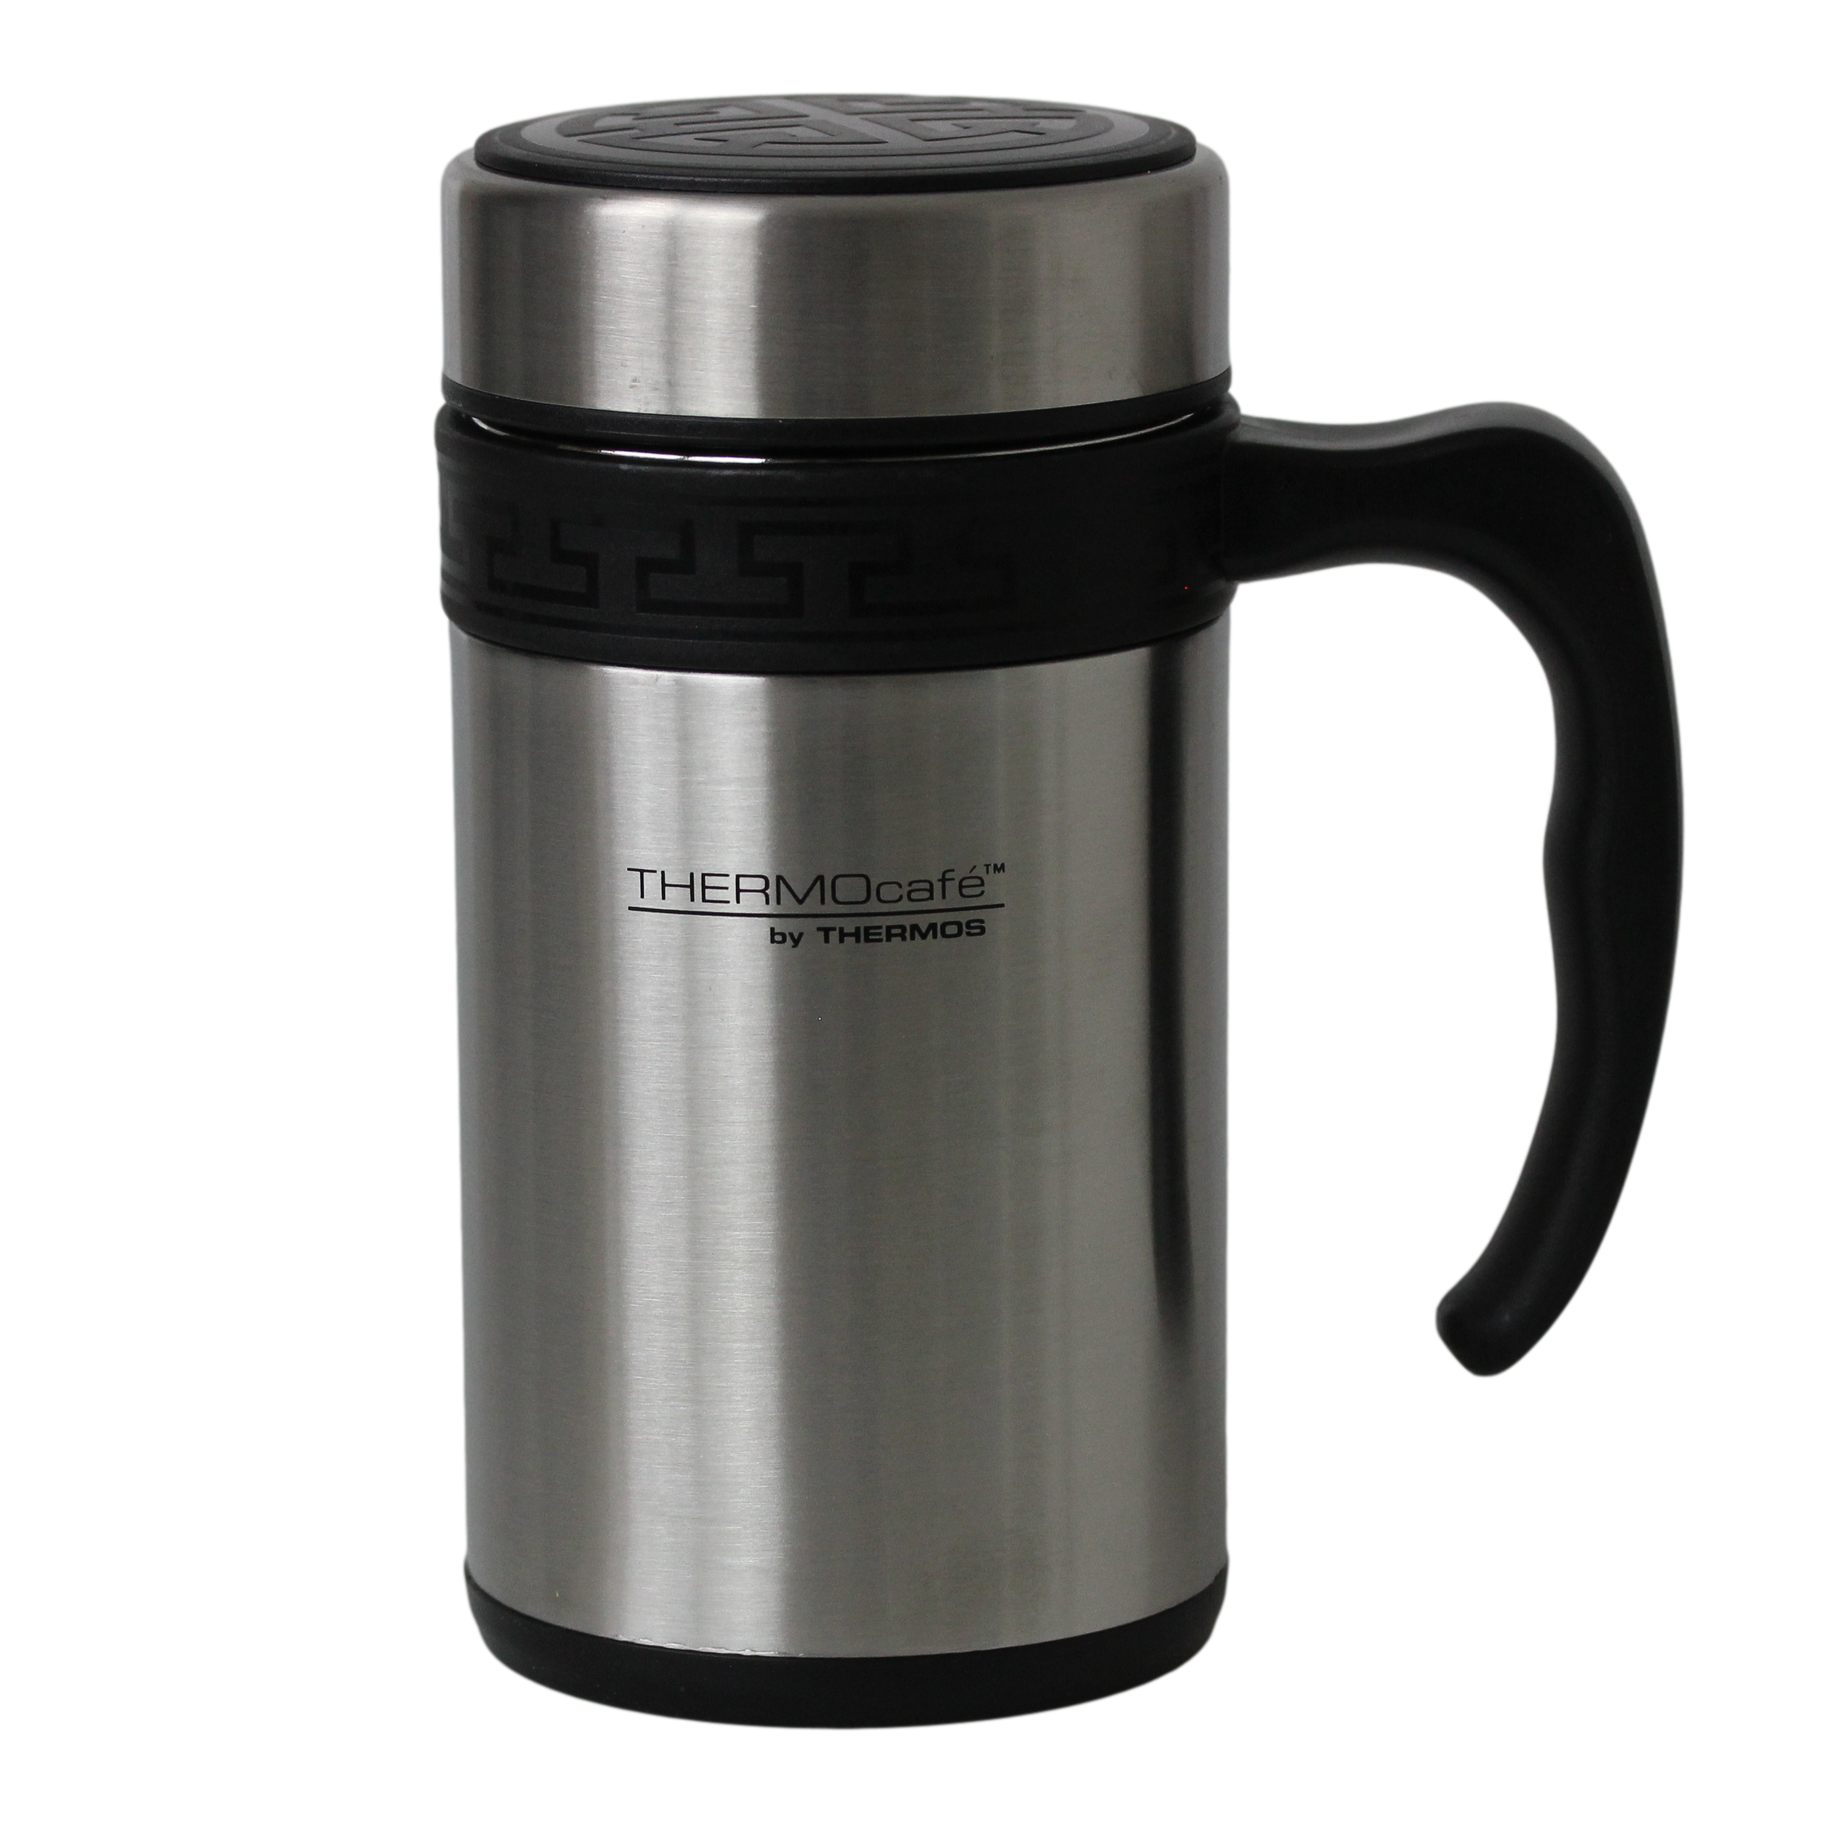 Thermos Thermocafe 500ml Stainless Steel Camping Mug